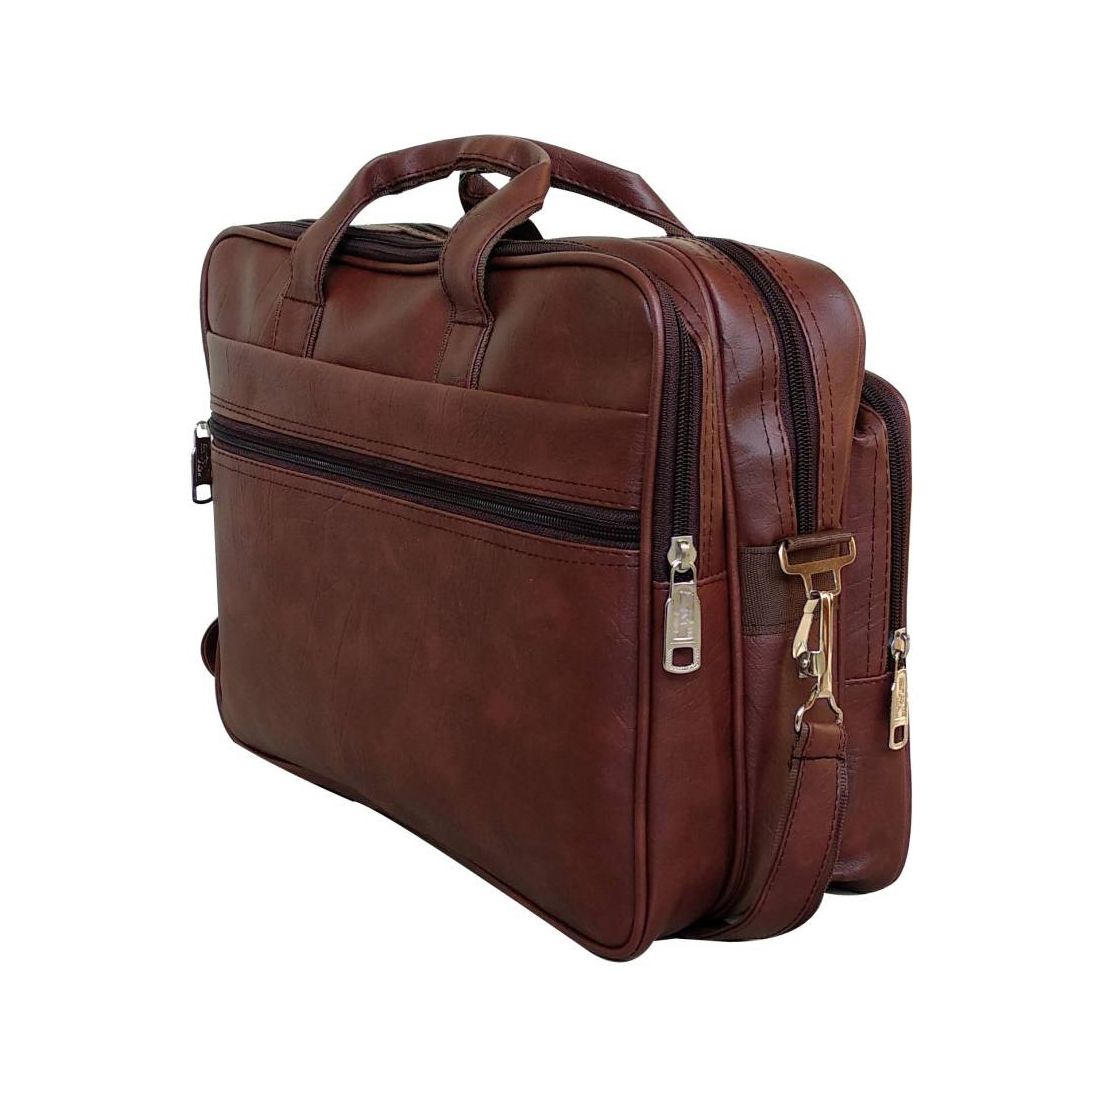 PhD Brown Synthetic Office Messenger Bag - Buy PhD Brown Synthetic ...